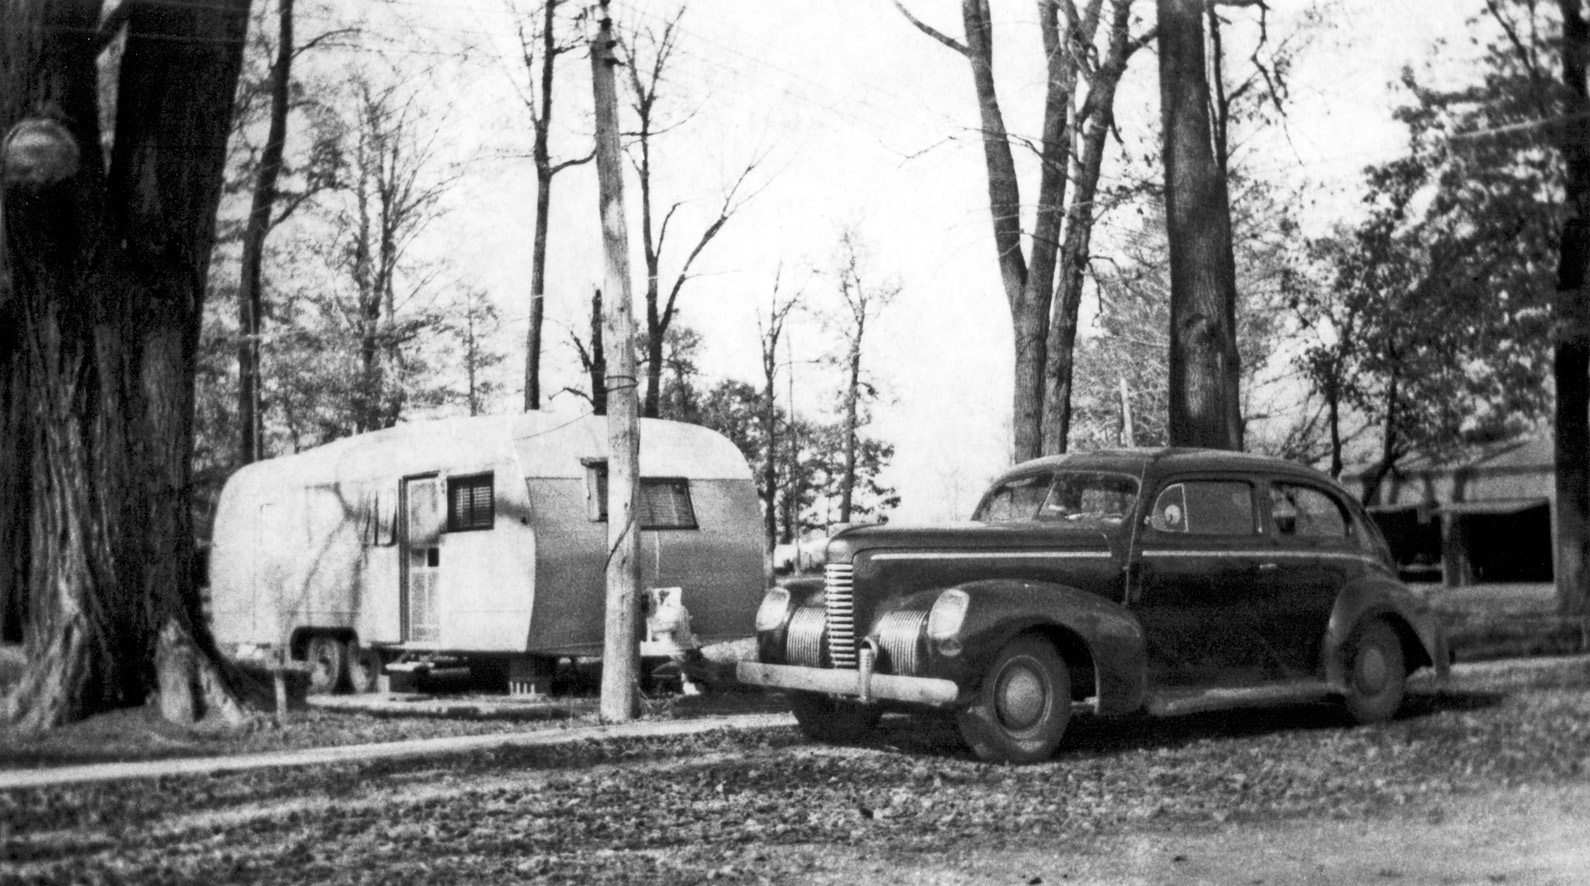 Flint, Michigan, 1947. Trailer park. Better weather than winter! Mother- and father-in-laws' trailer and auto. View full size.